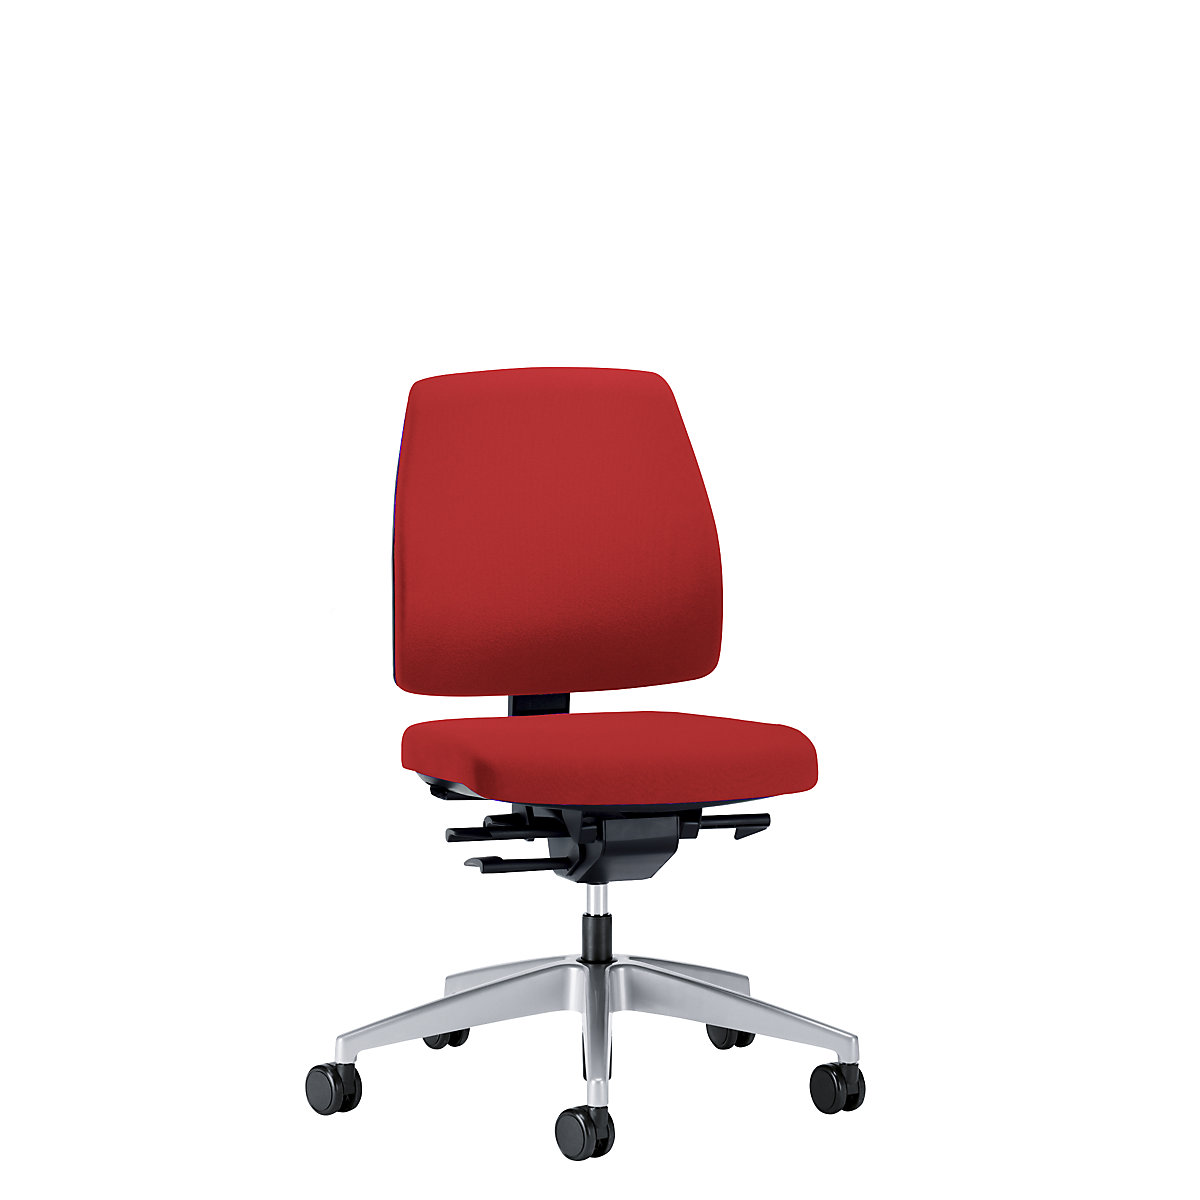 GOAL office swivel chair, back rest height 430 mm – interstuhl, brilliant silver frame, with soft castors, flame red, seat depth 410 mm-1